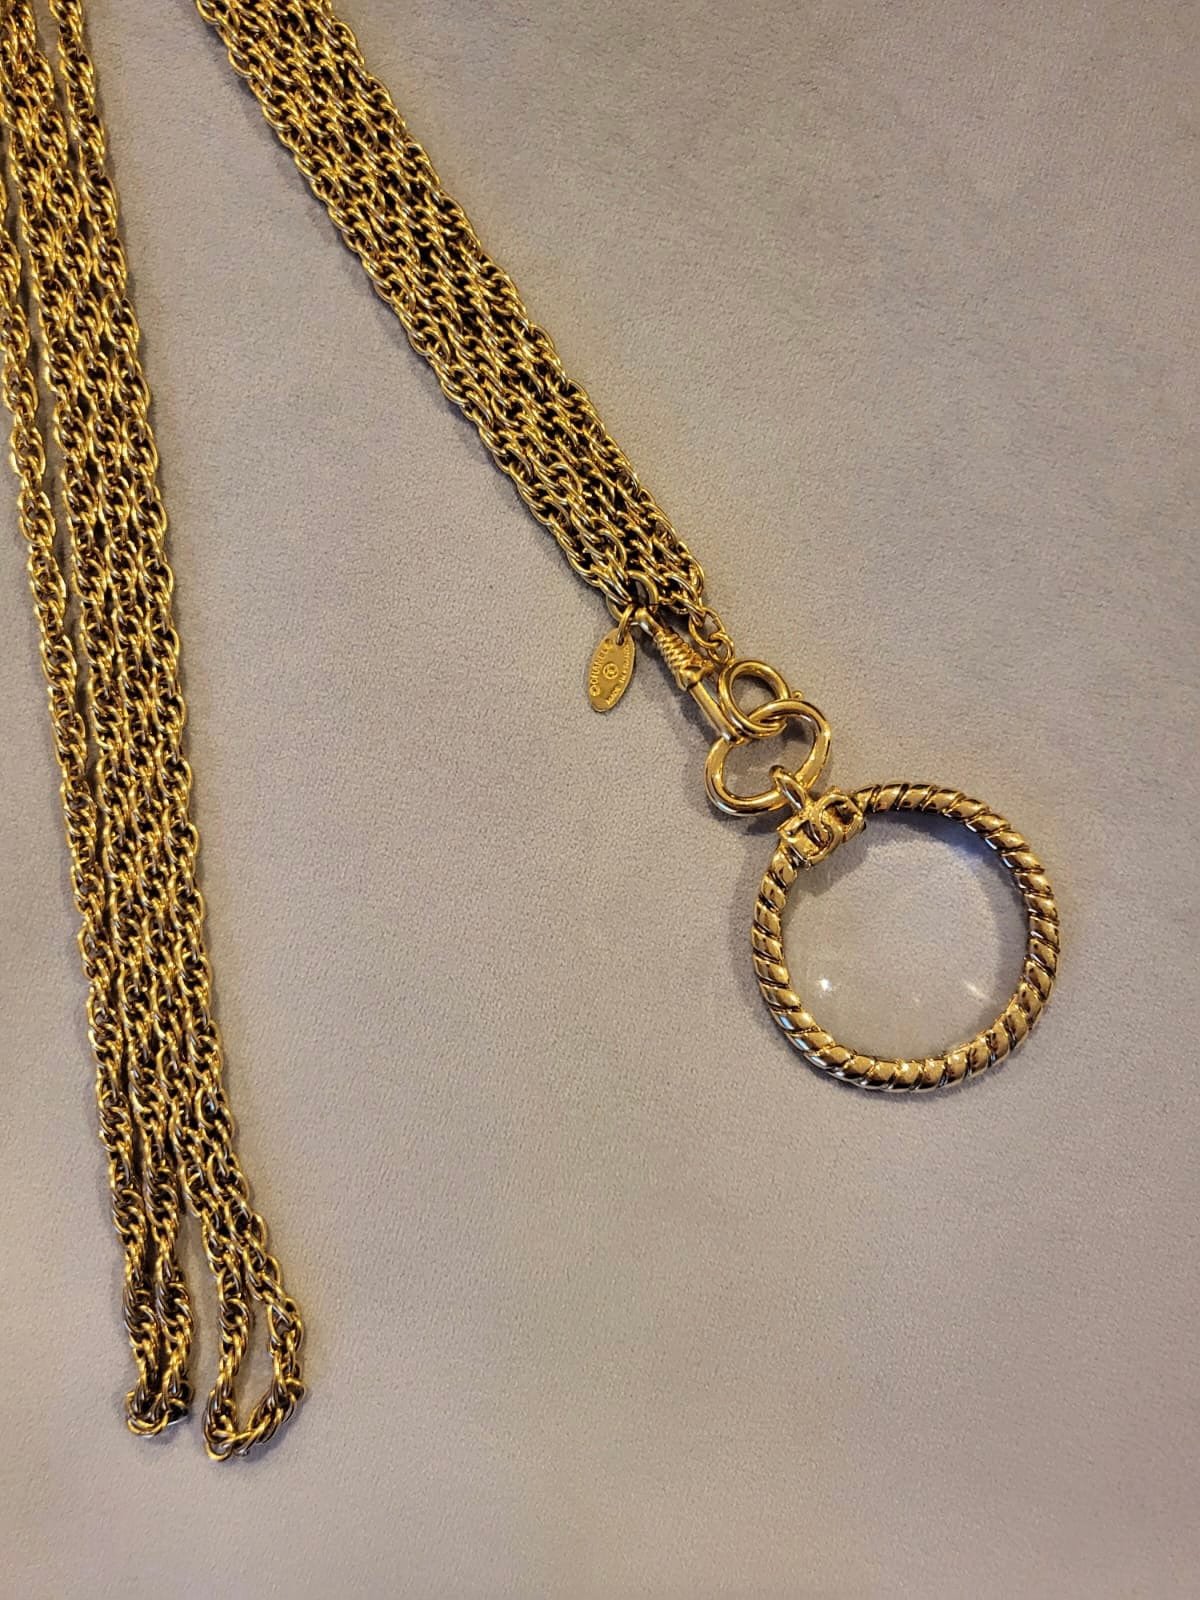 Chanel Chanel Vintage Loupe Necklace GHW SKC1493